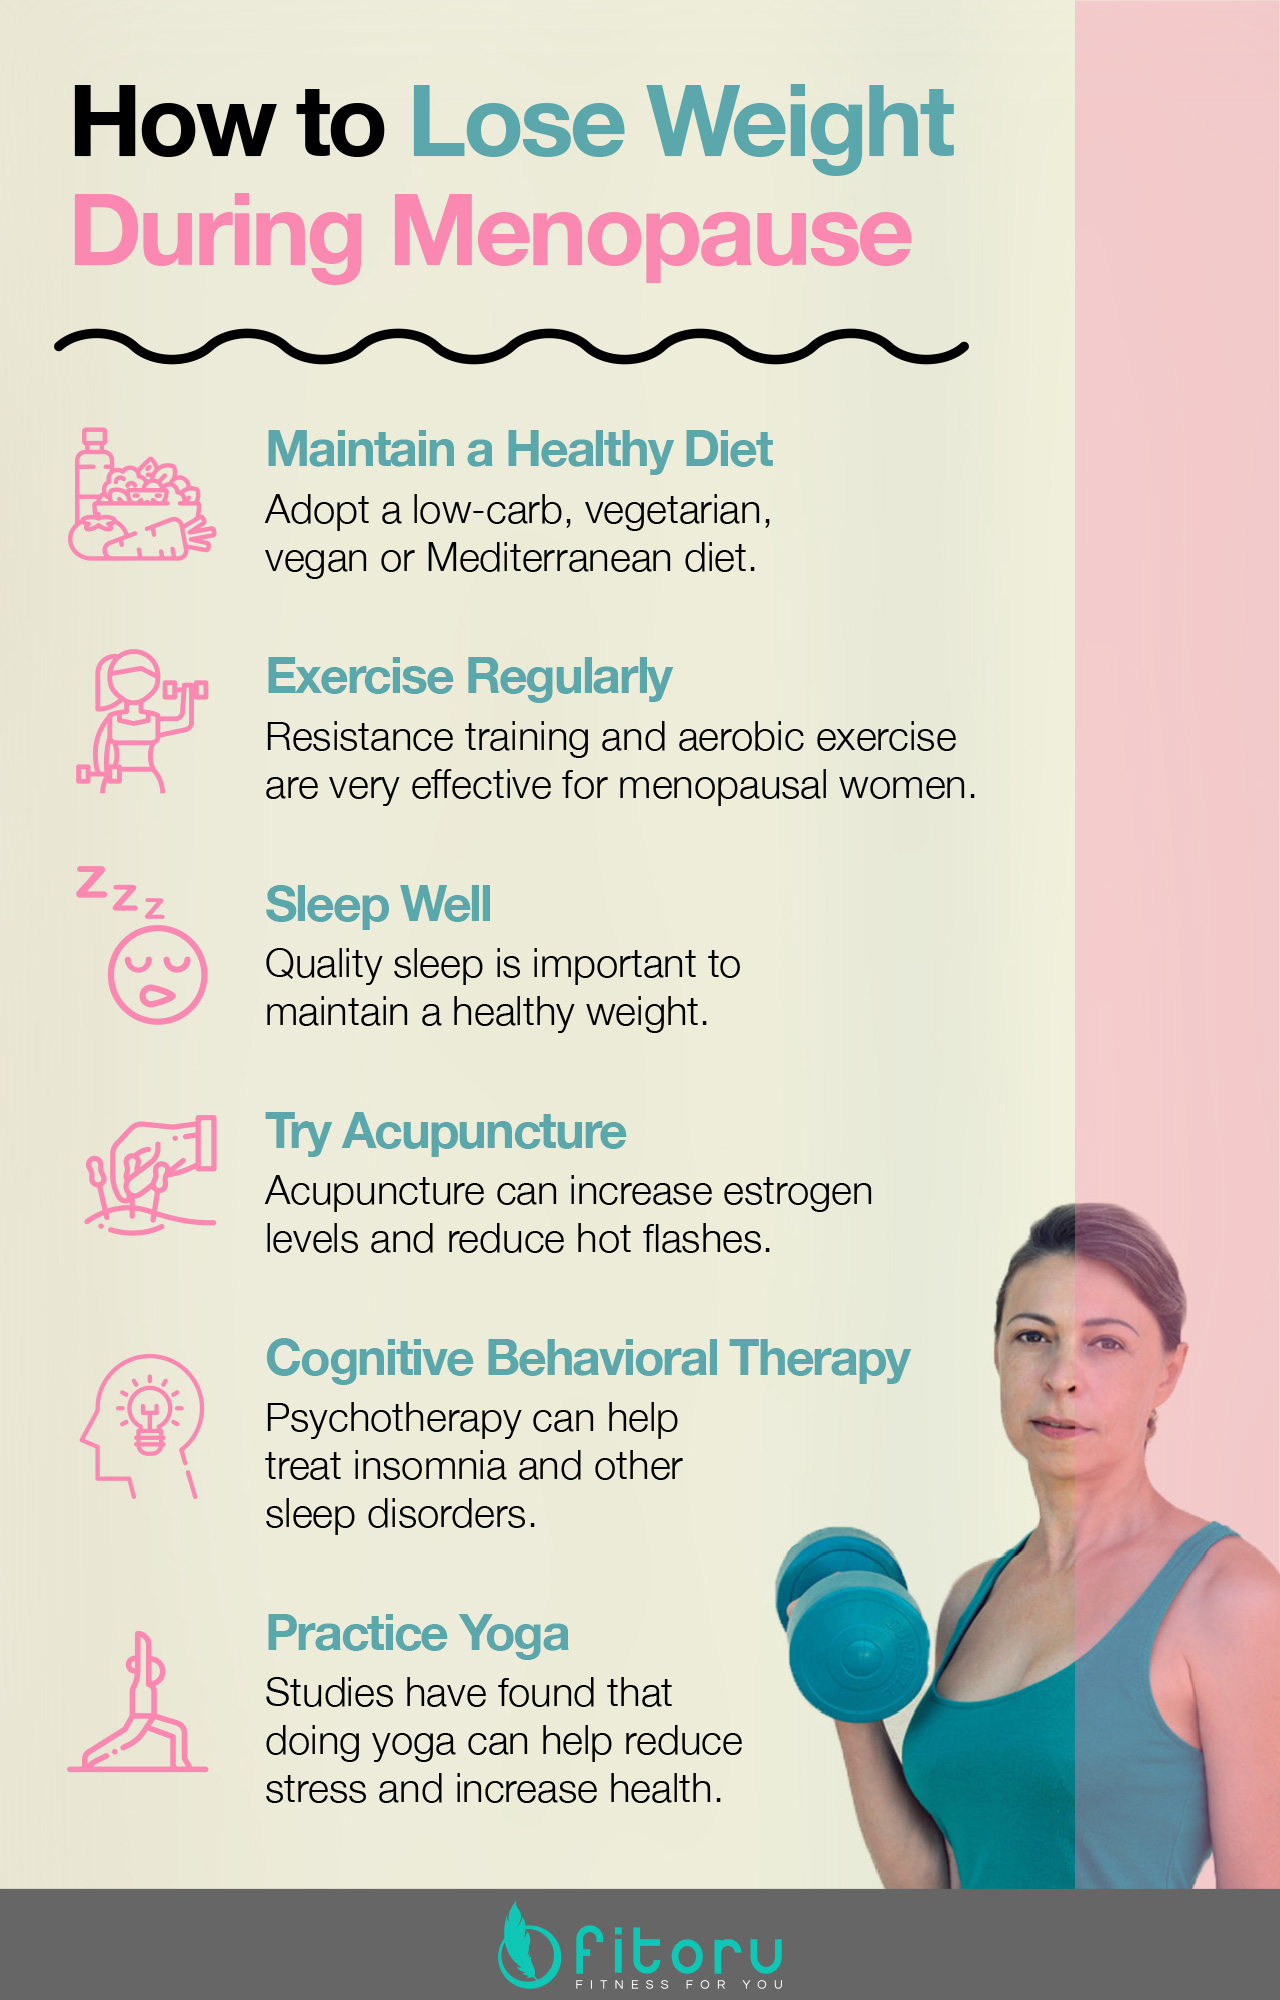 How to lose weight during menopause.